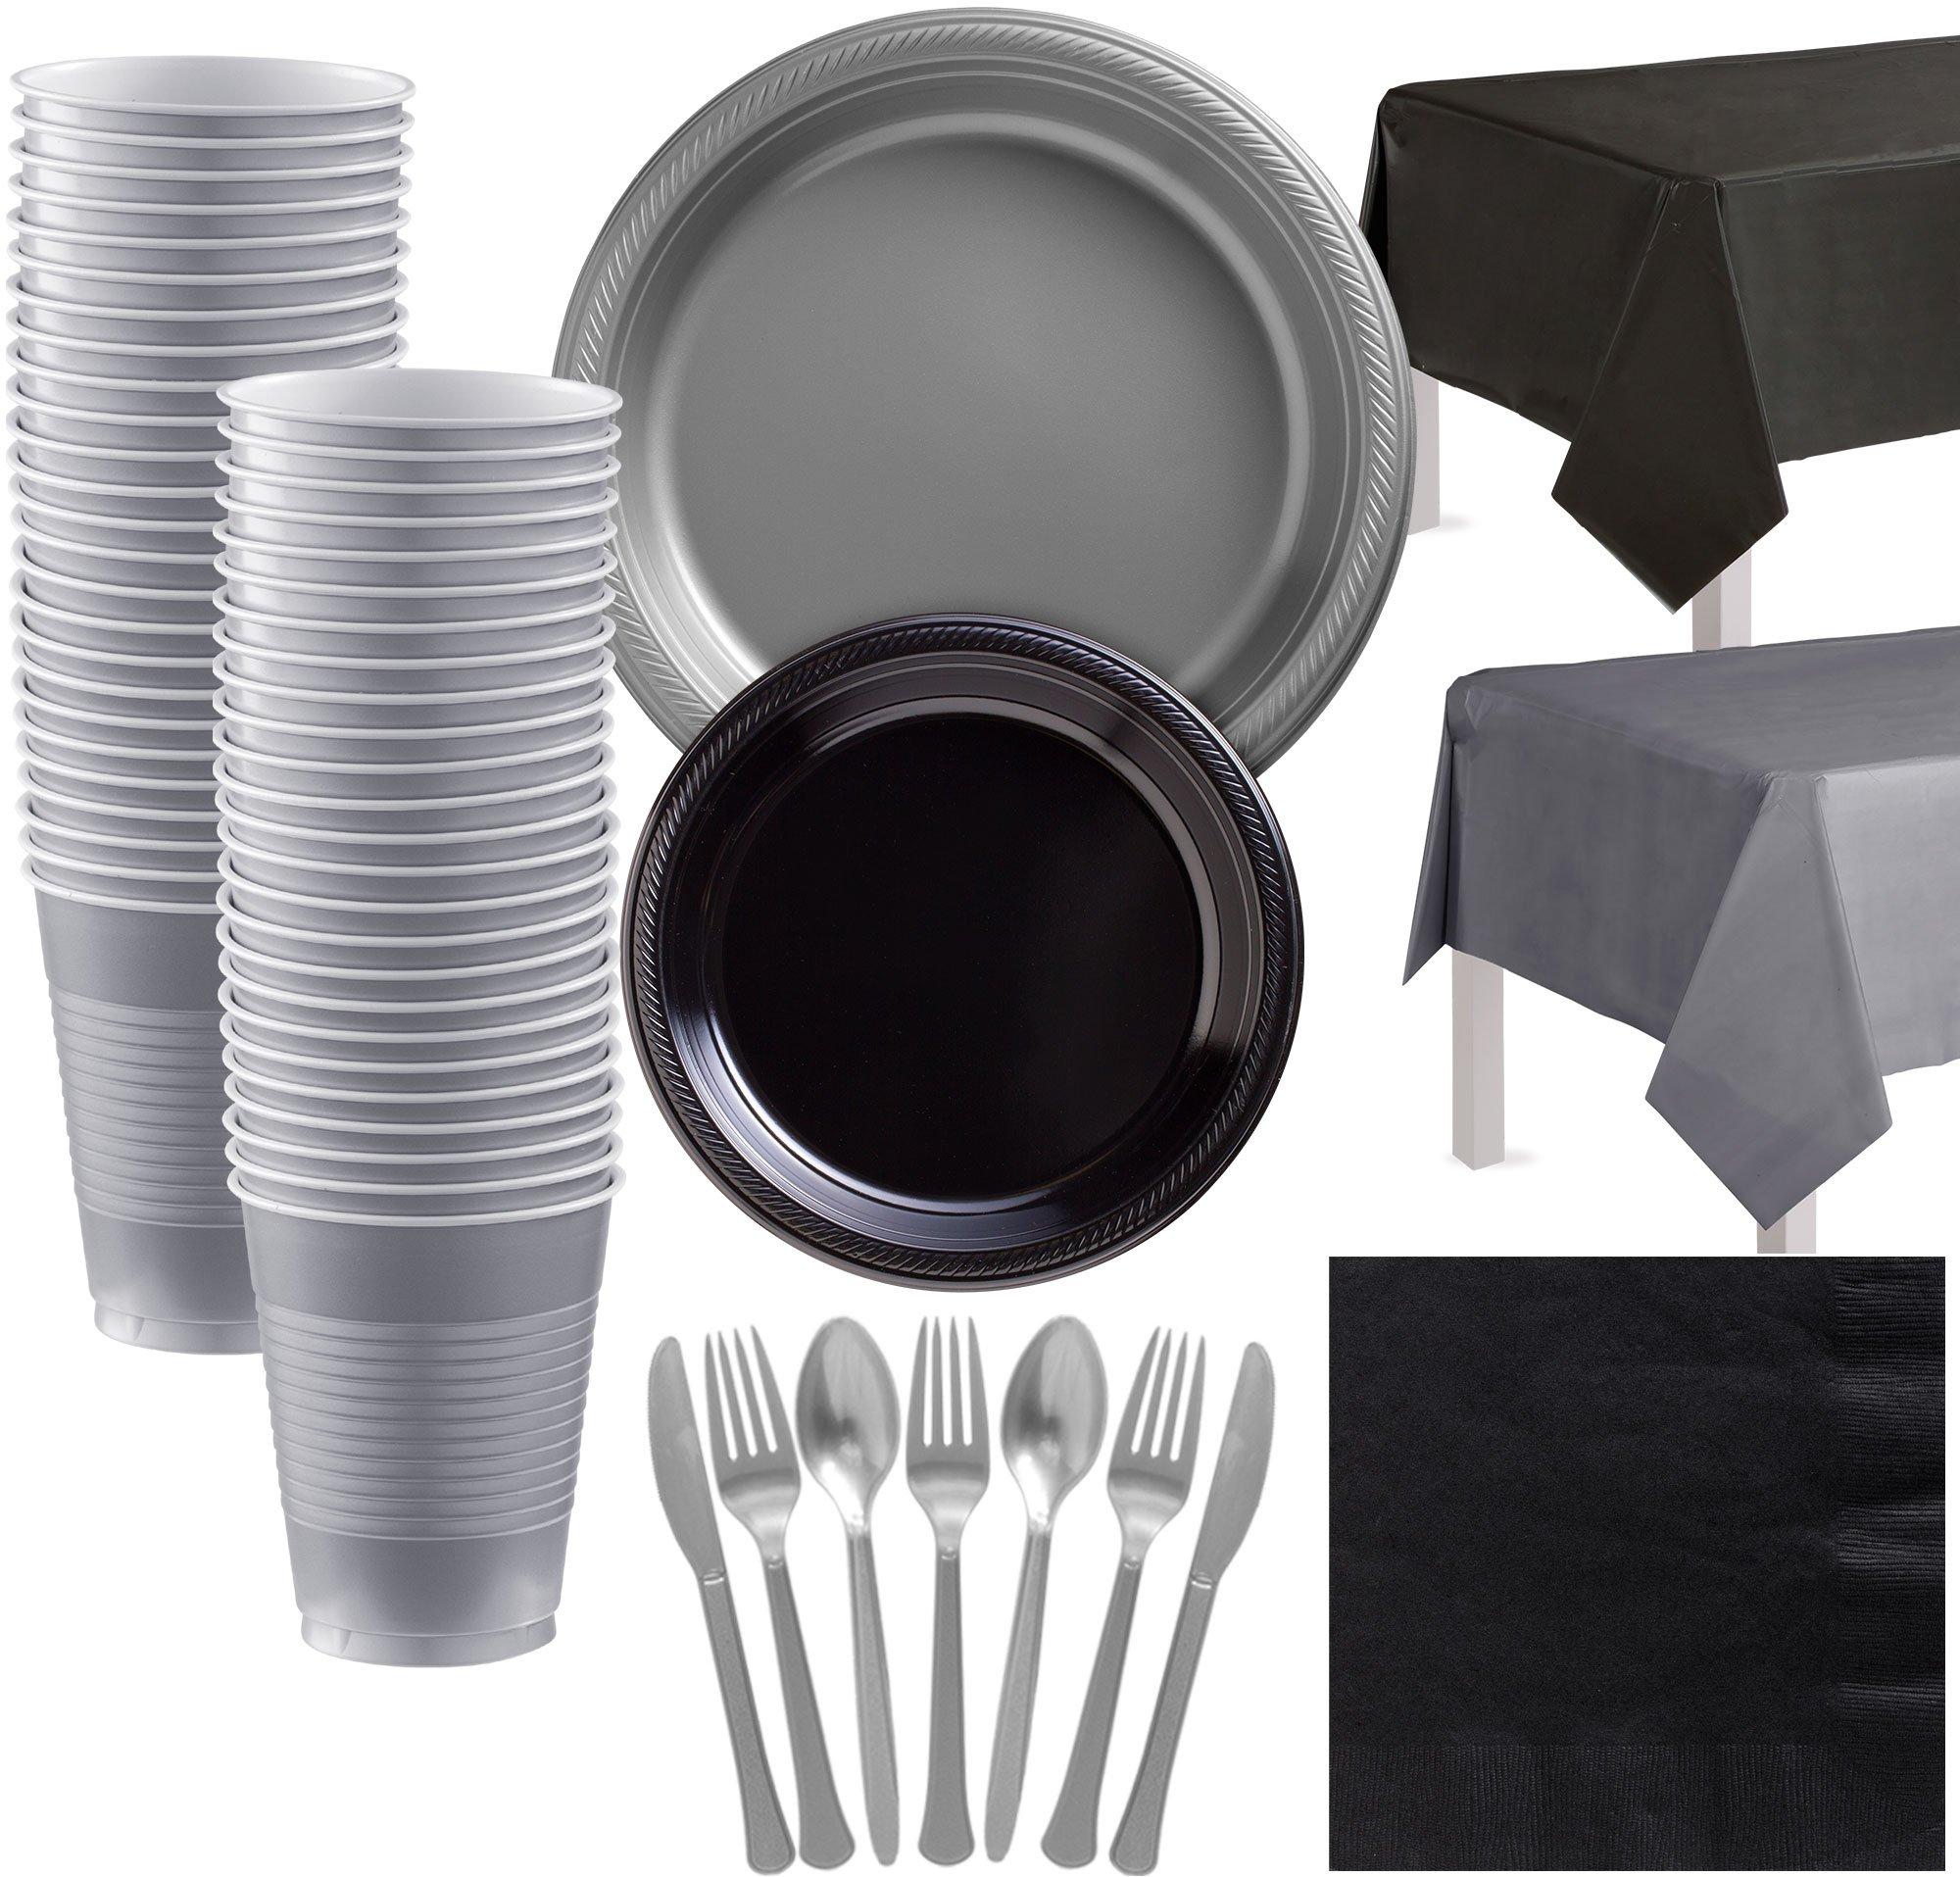 Black & Silver Plastic Tableware Kit for 50 Guests